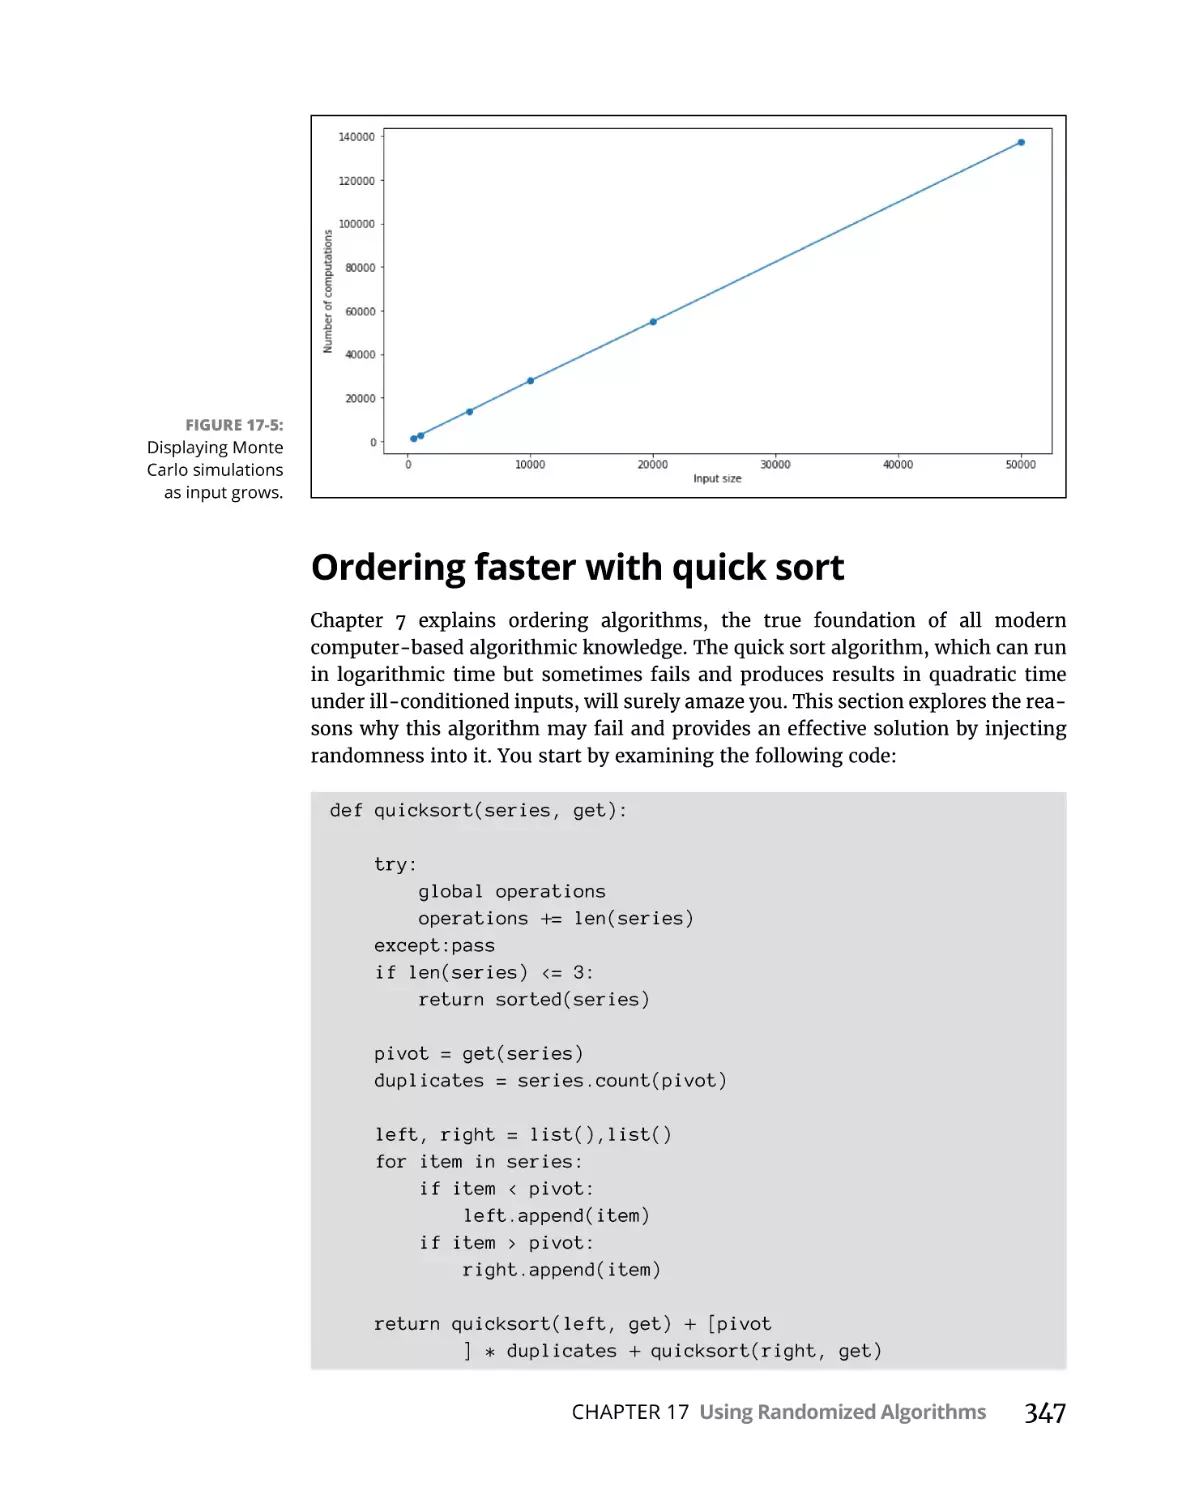 Ordering faster with quick sort